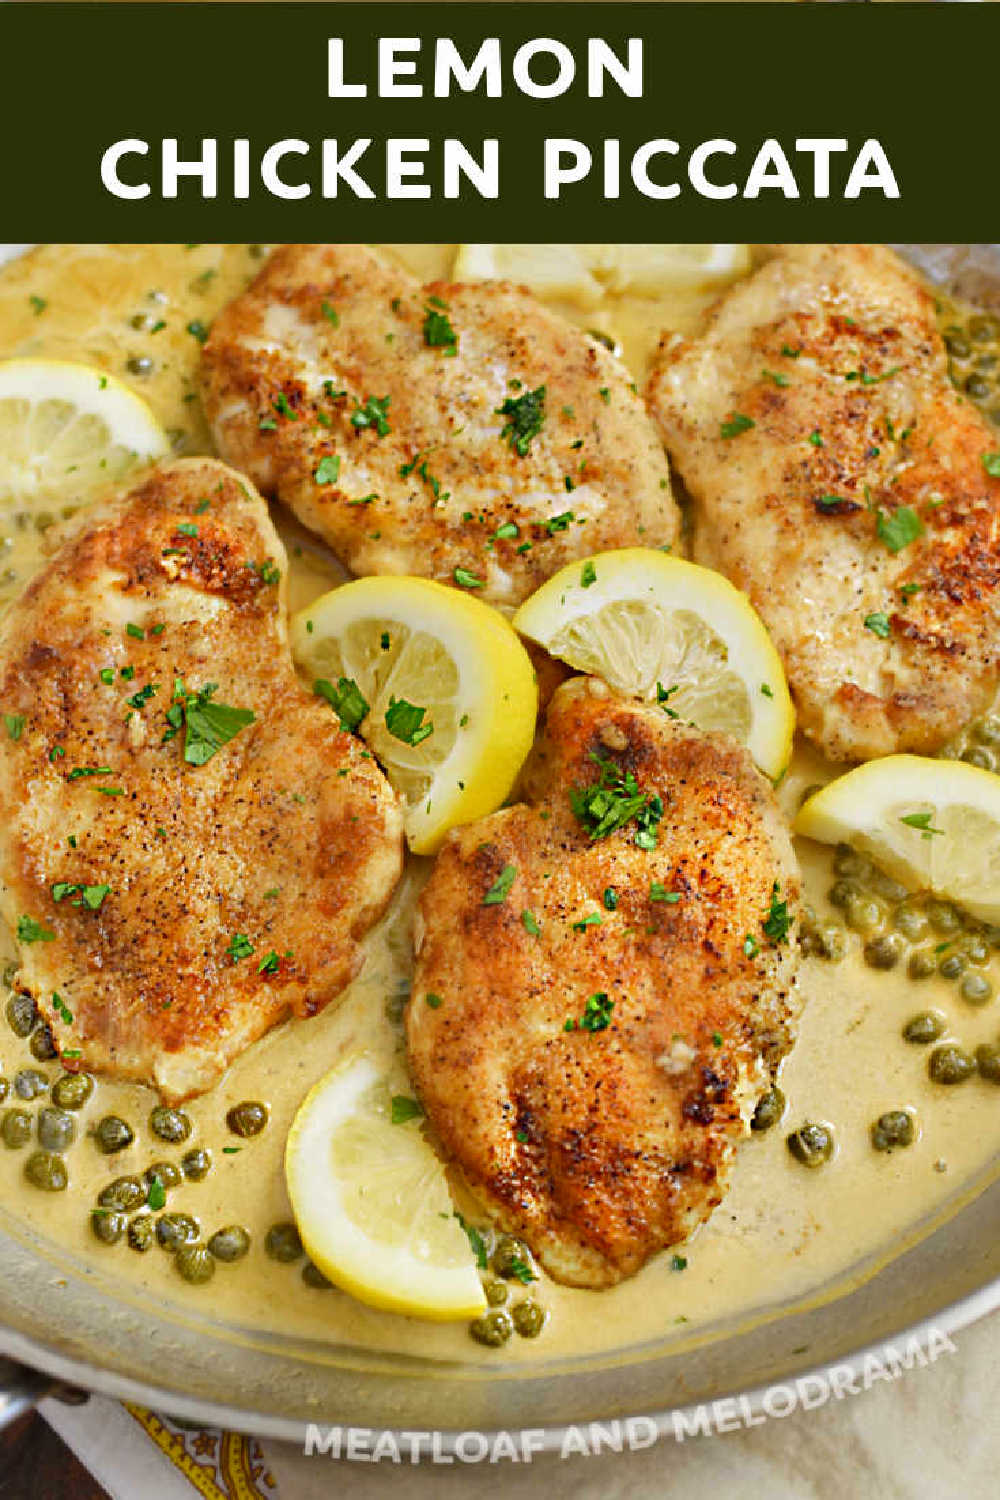 This Lemon Chicken Piccata recipe is pan fried chicken cutlets in a creamy lemon butter sauce with white wine and capers. Serve with your favorite pasta for a special weeknight dinner or Sunday supper!  via @meamel